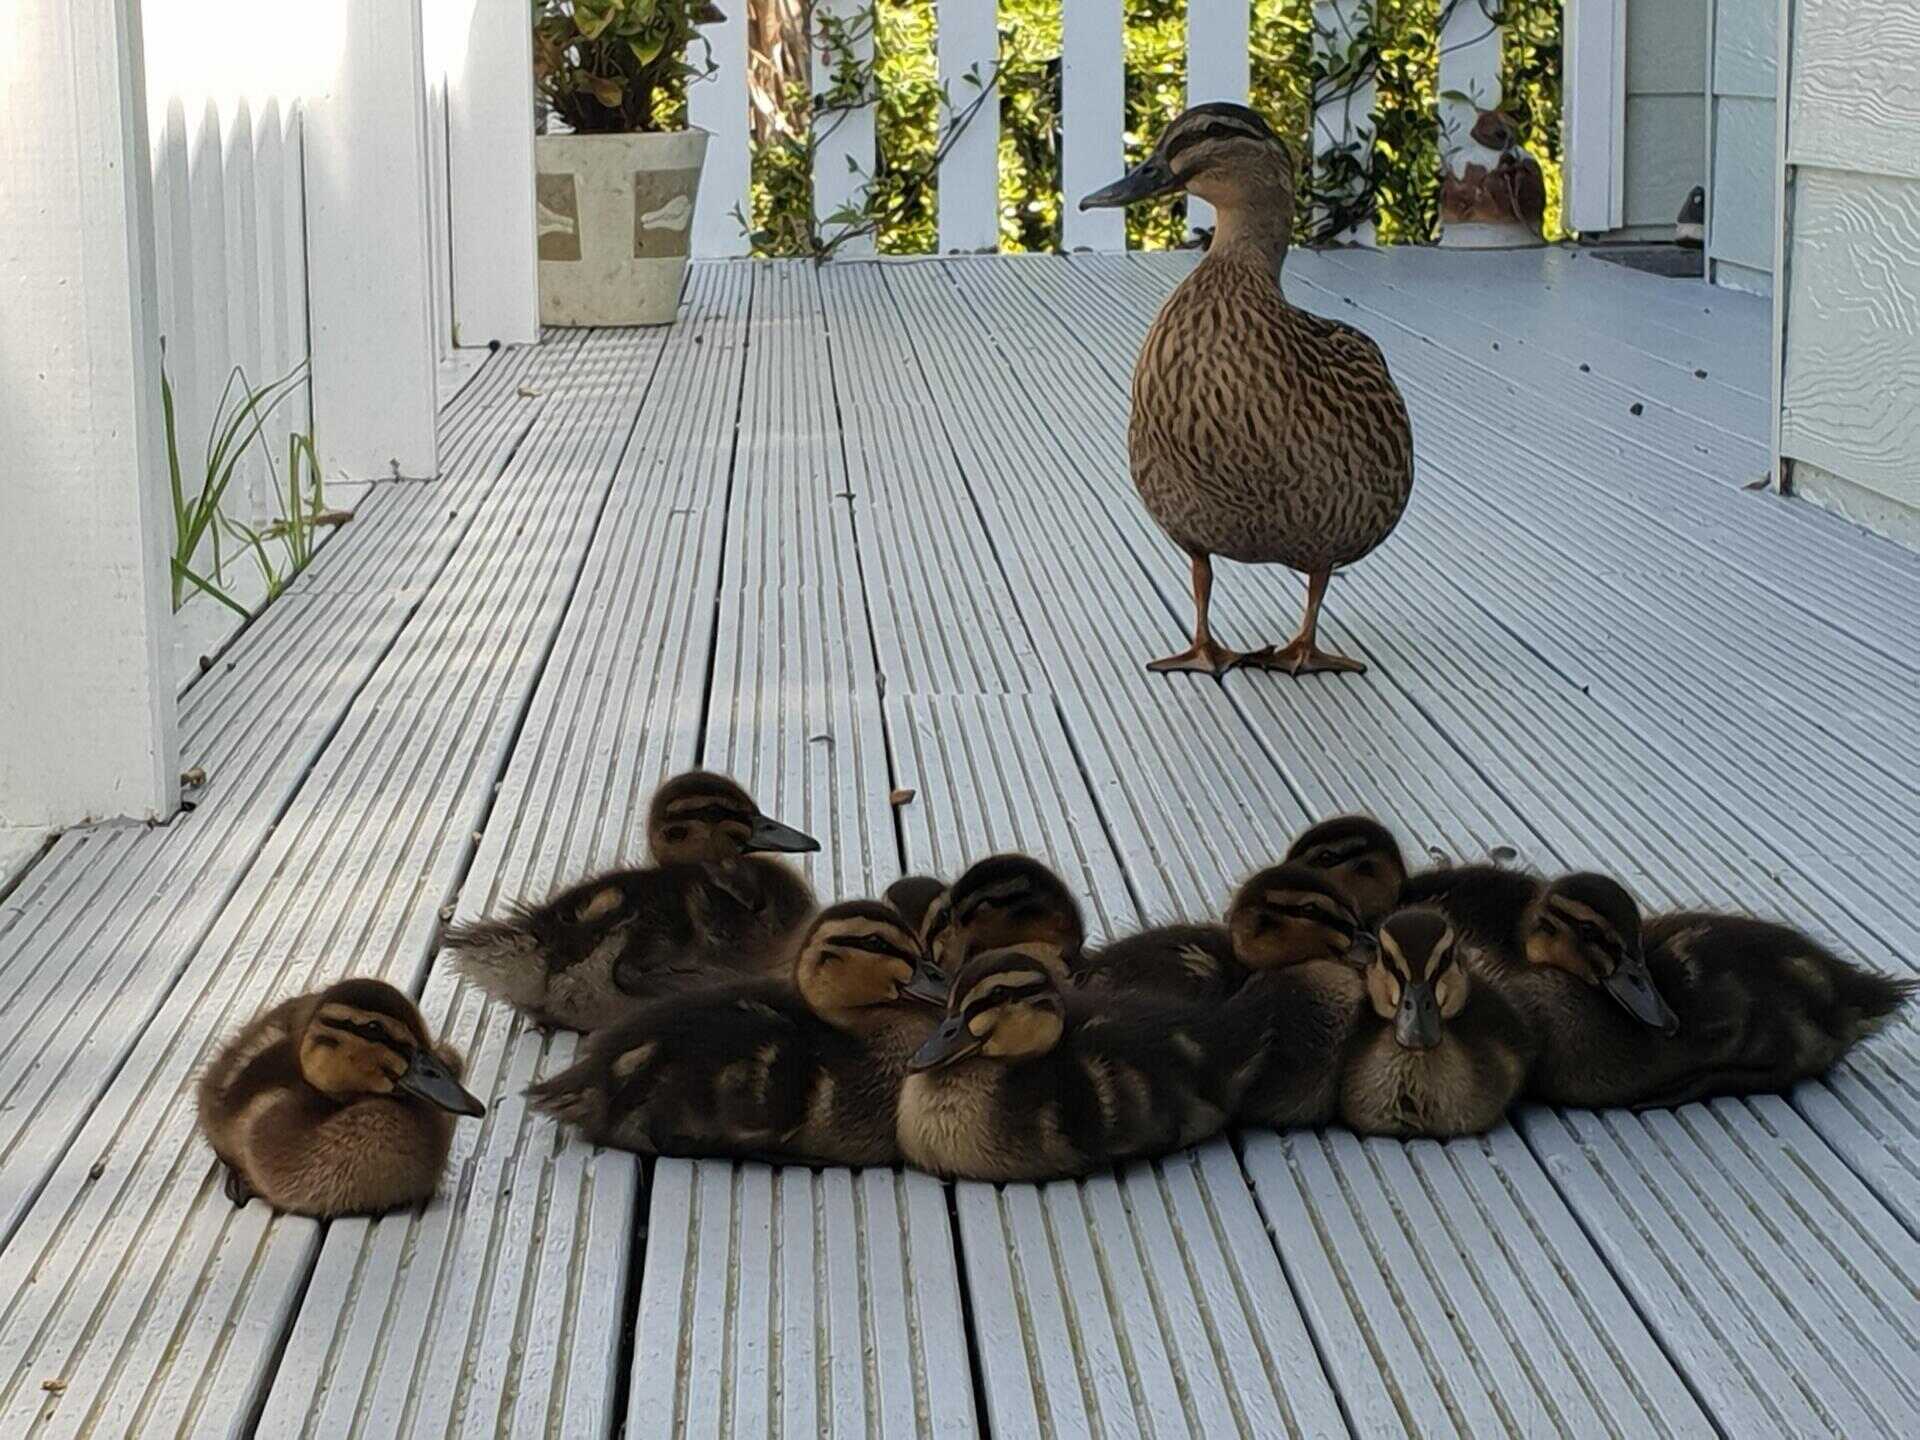 How To Keep Ducks From Pooping On Porch